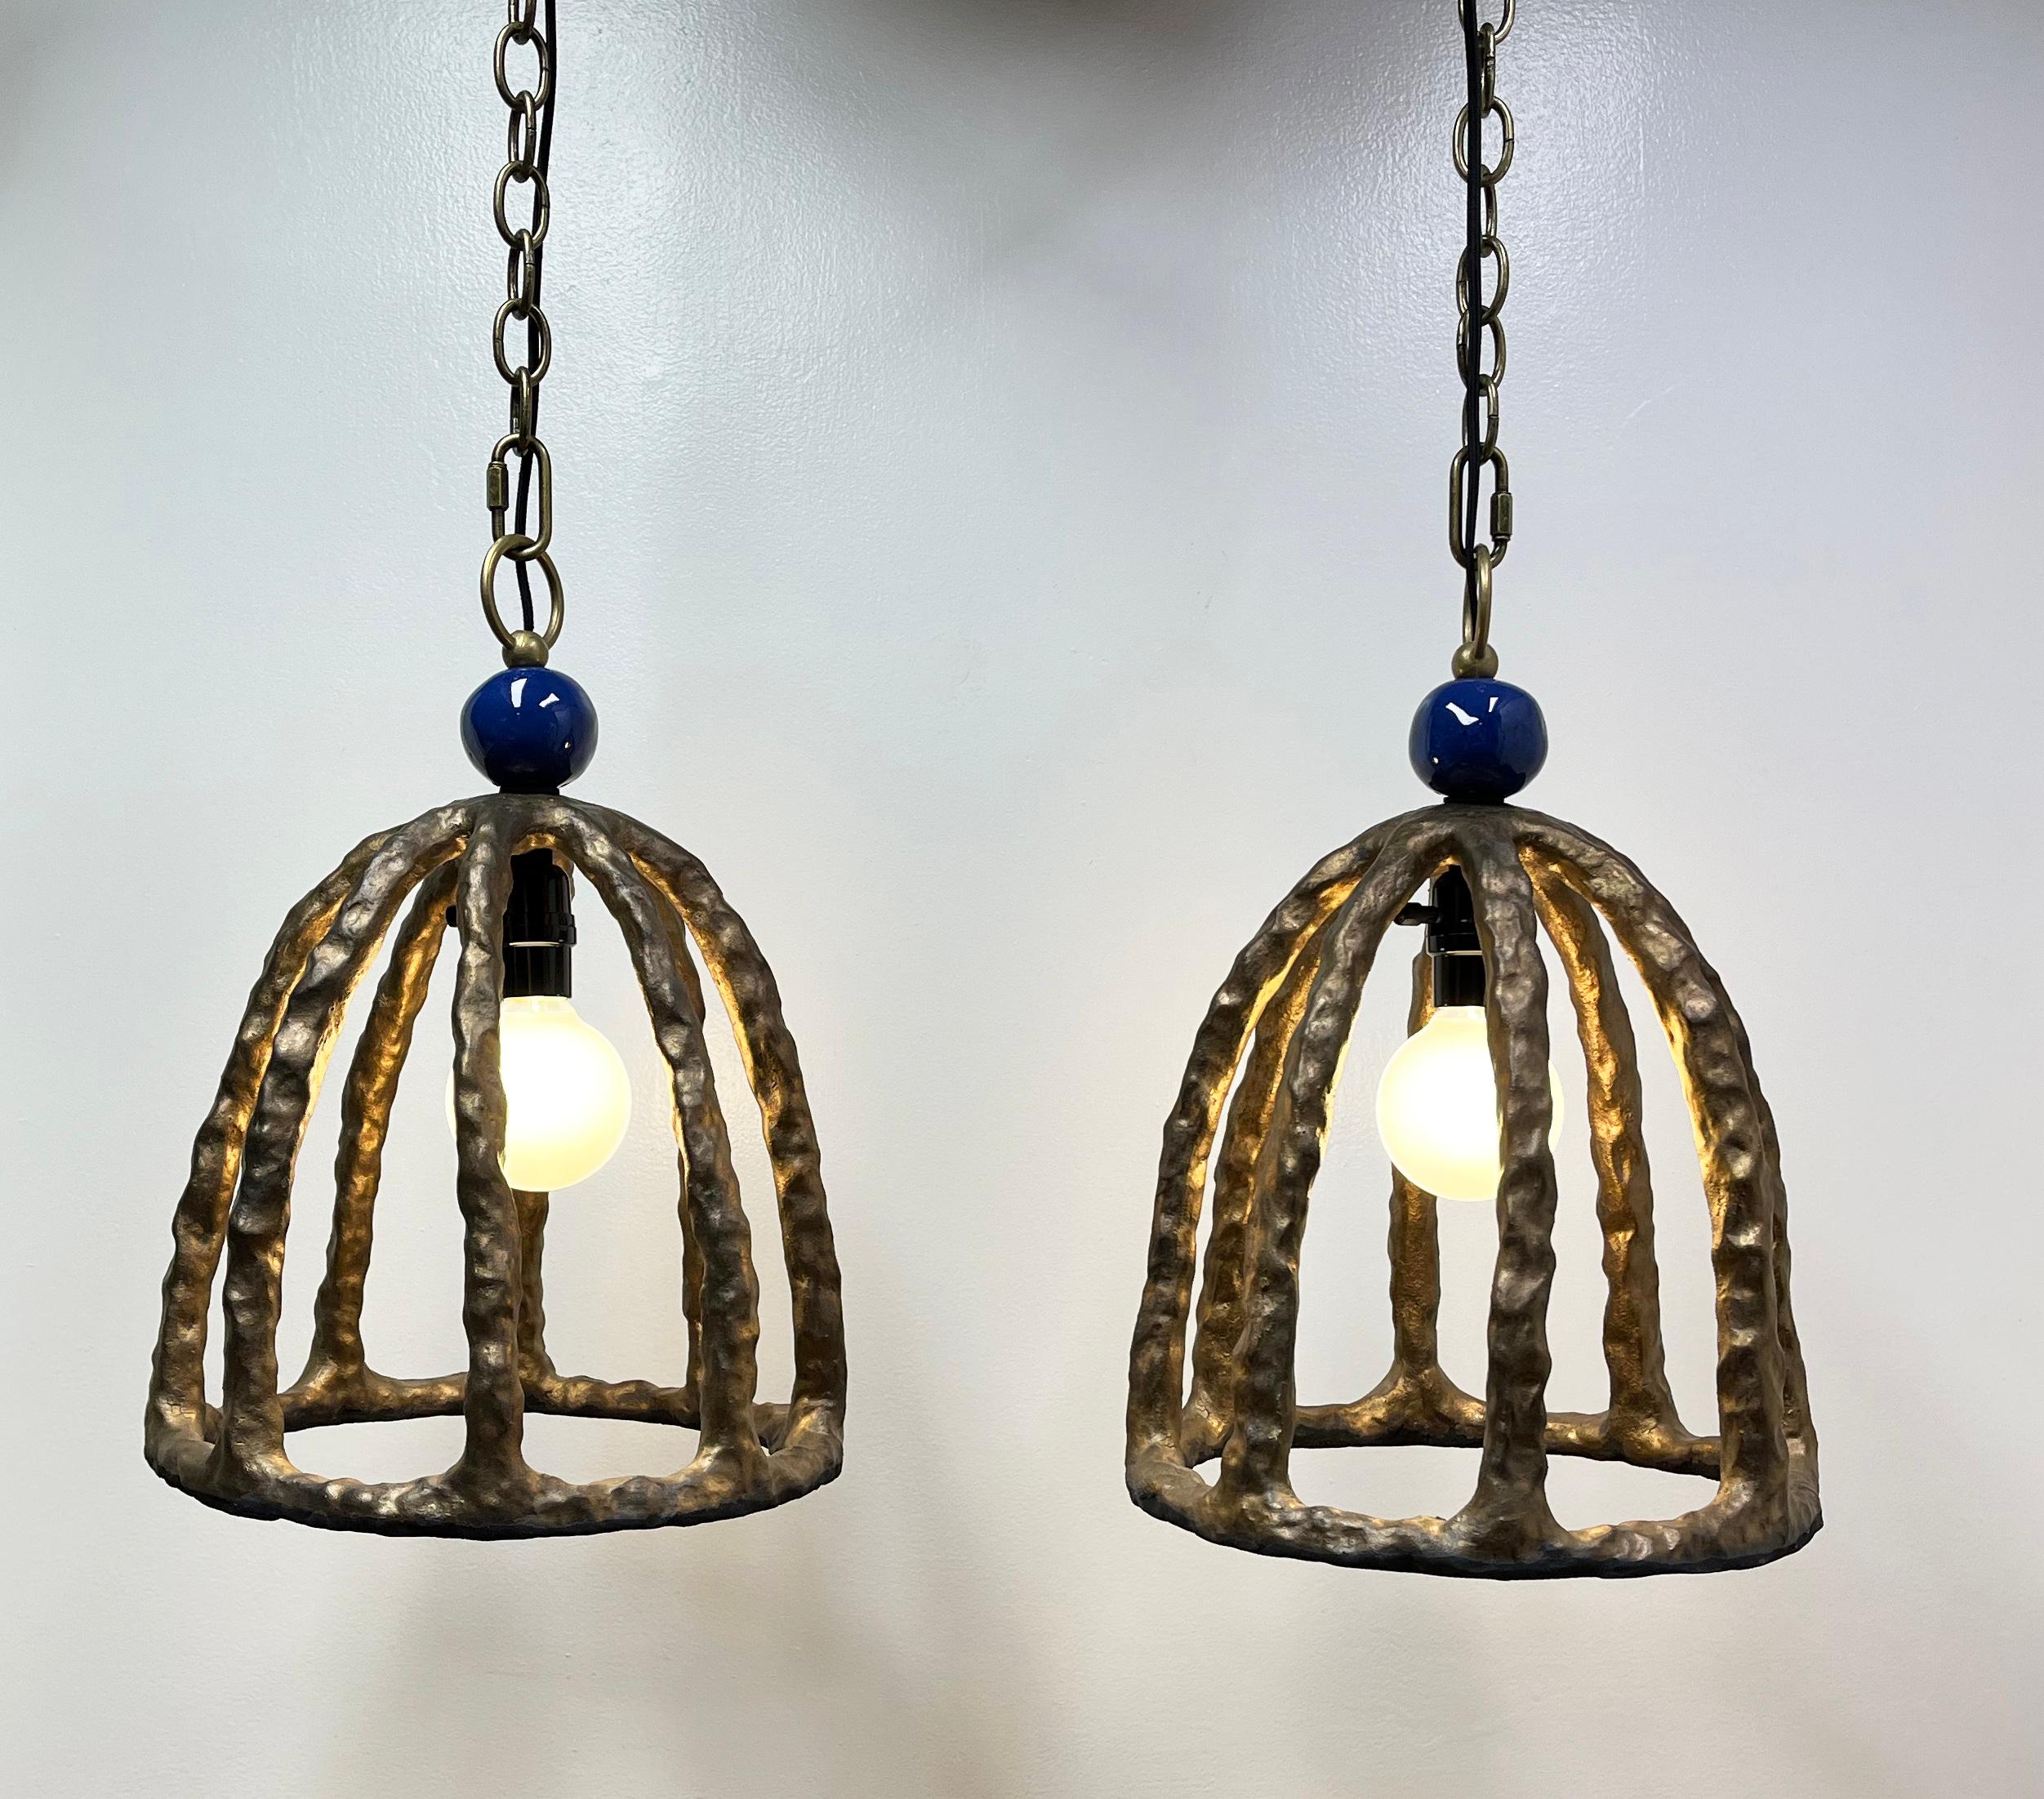 Birdcage Stoneware Pendant Lamp Pair by Olivia Barry / By Hand Eclectic Mix